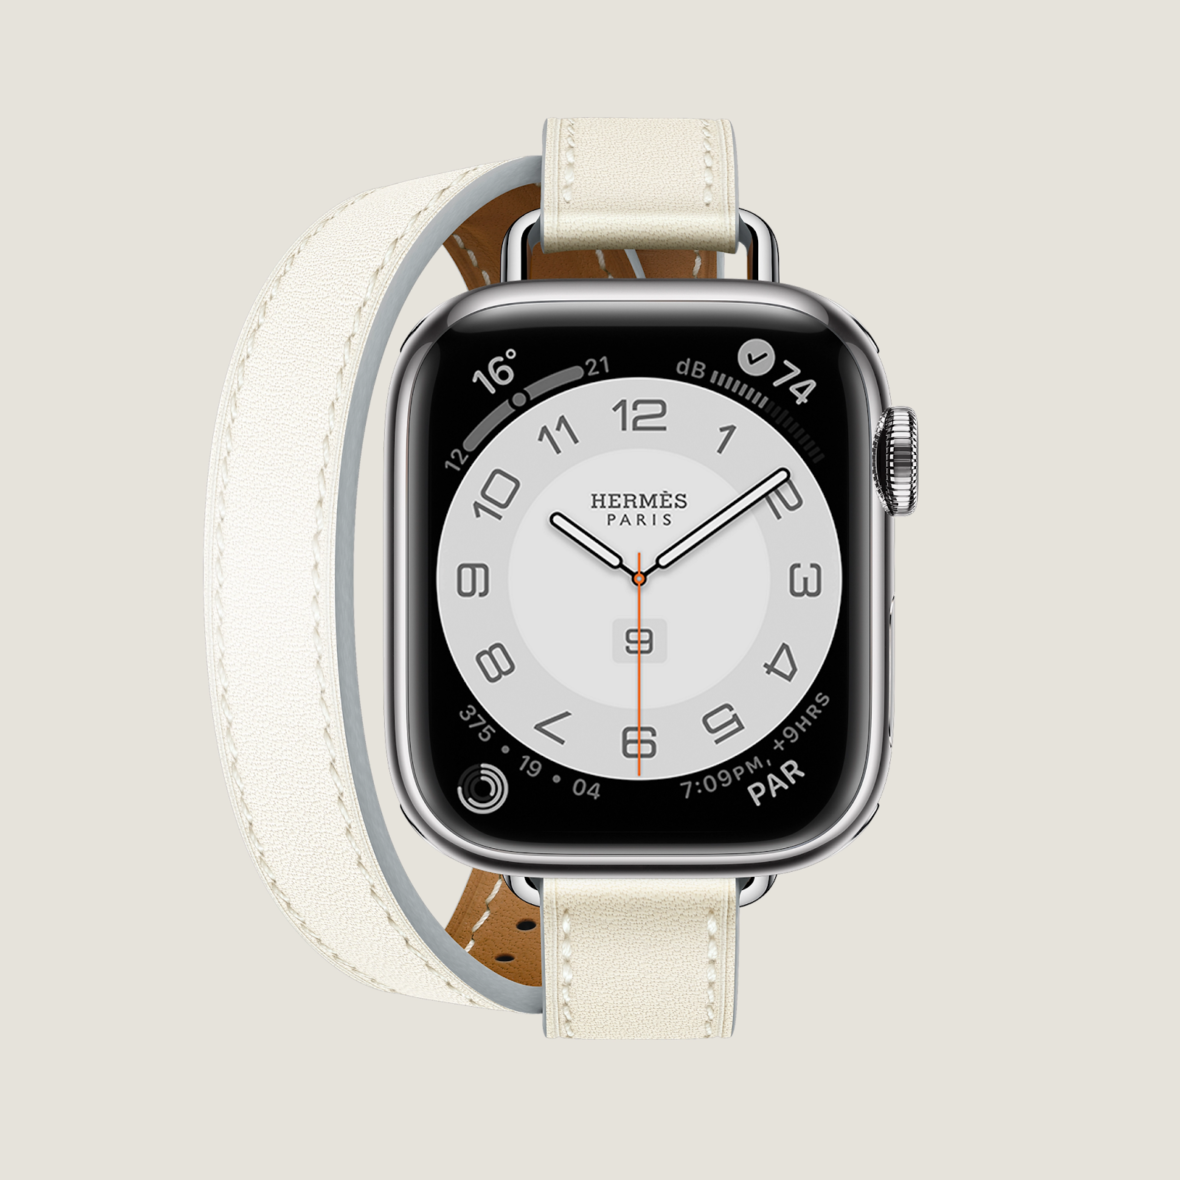 The Hermès Apple Watch partnership has released several products over the years, which are known for customizing luxury. However, this Hermès Apple Watch Series 8 case in stainless steel 41 mm & double tour band in Blanc Swift calfskin is a true masterpiece. It's a limited-edition version features a double tour band made from white calfskin leather, meticulously crafted by Hermès artisans. The stainless steel case adds to its durability and premium feel. Priced at $1,399, this Apple Watch is a perfect fusion of high fashion and cutting-edge technology, designed for those who appreciate the finer things in life.